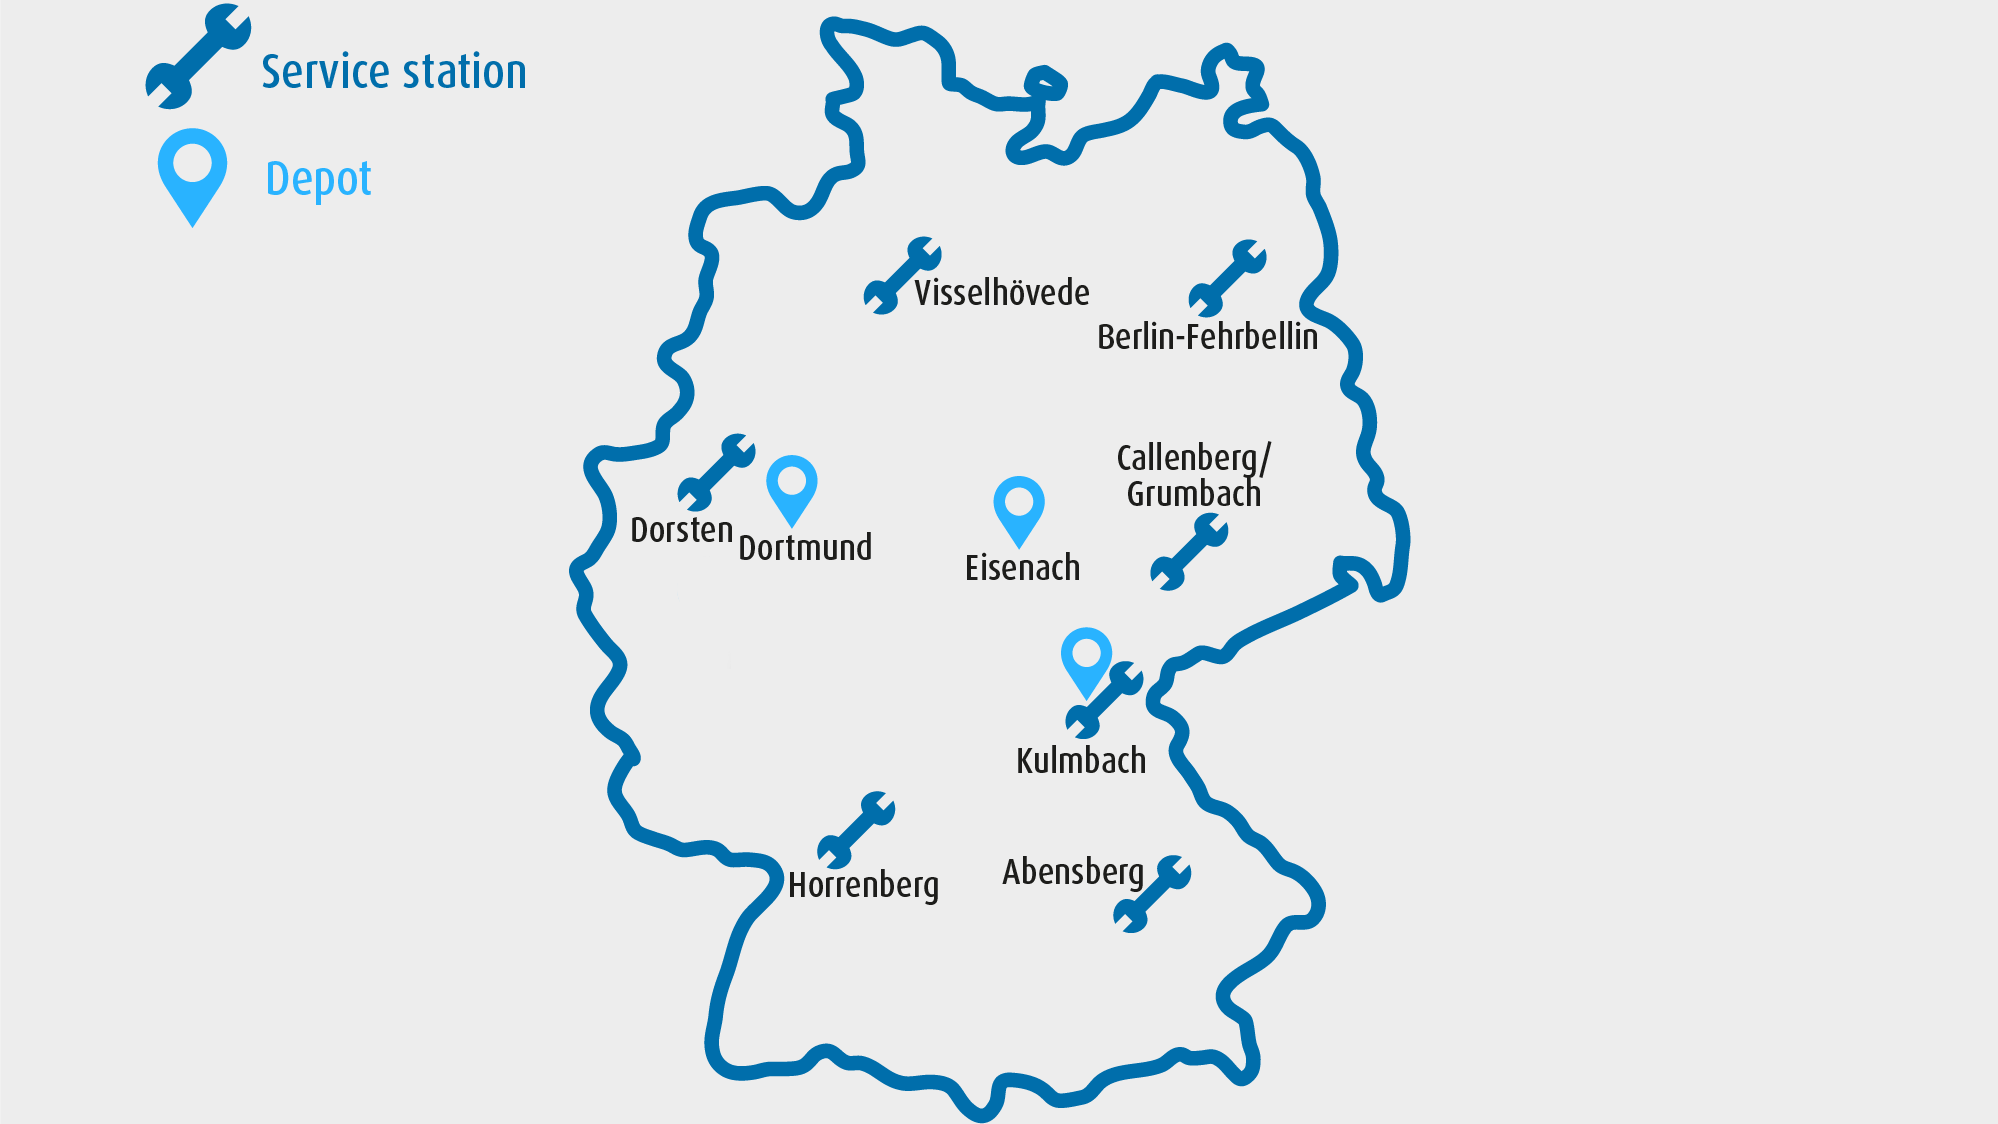 Service stations & depots in Germany 